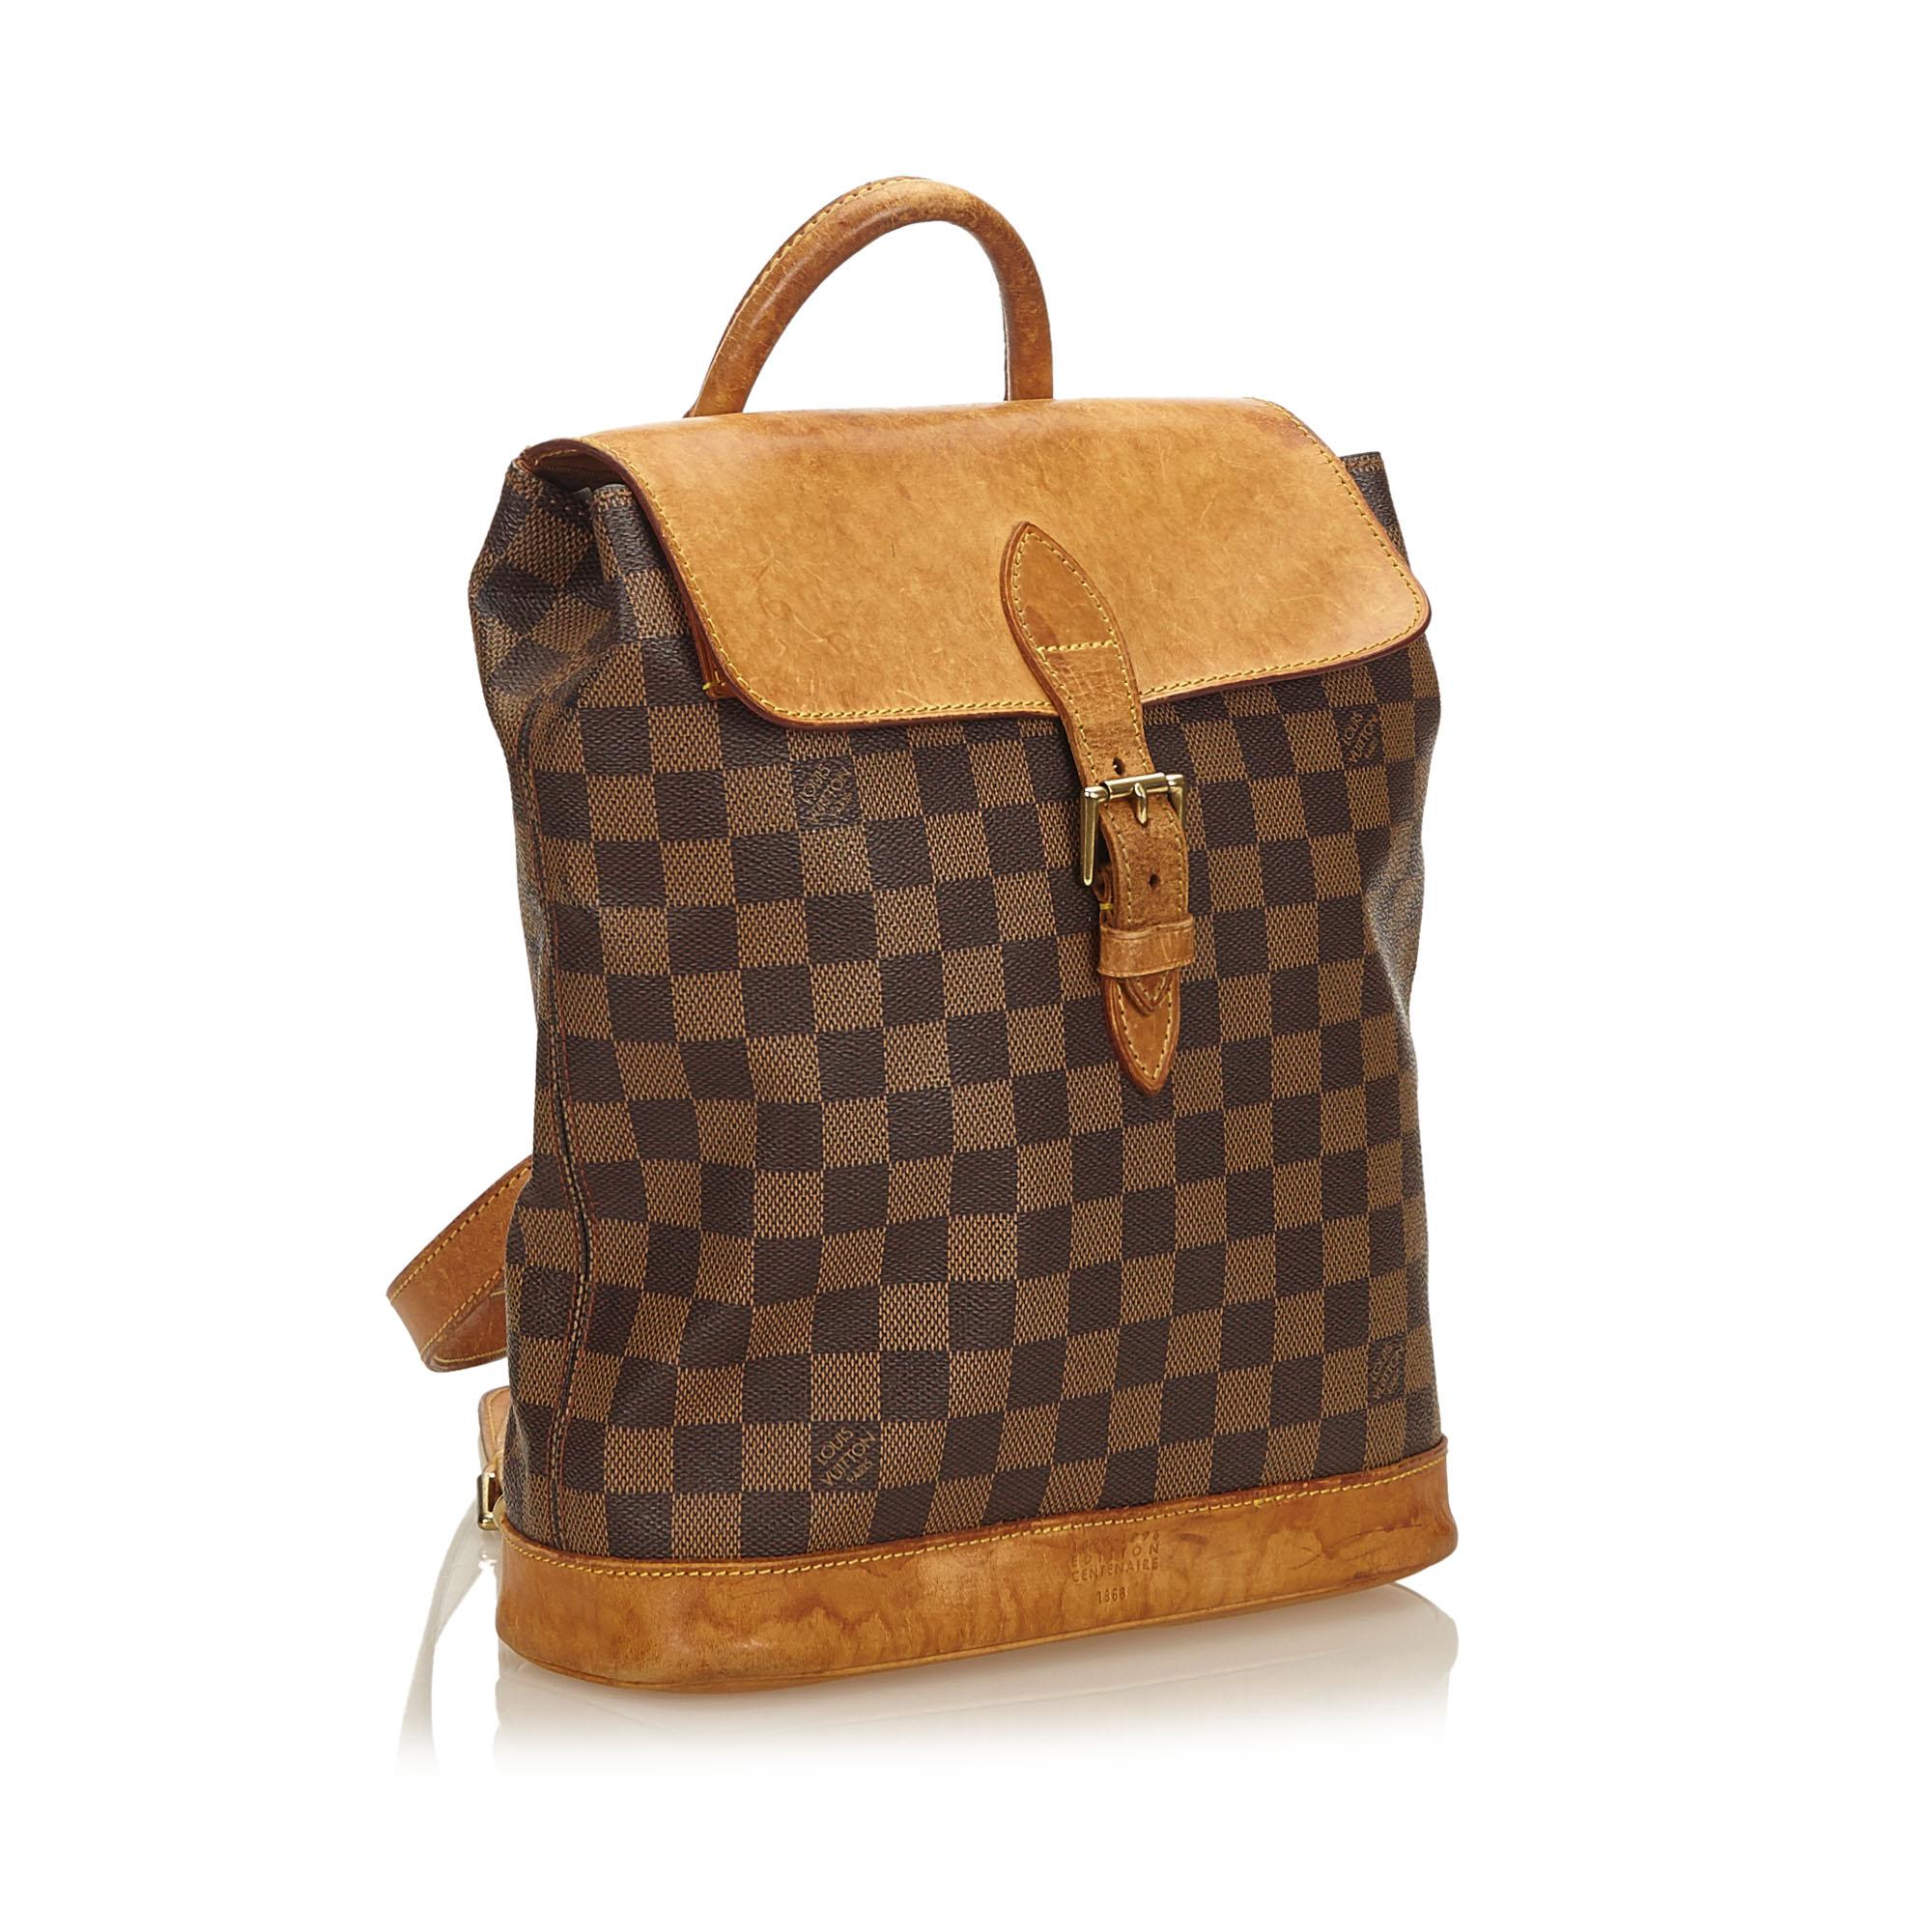 The Arlequin Backpack features a damier canvas body, vachetta trim, rolled leather top handle, flat back straps, front flap with buckle, and interior slip pocket.

It carries a B condition rating.

Dimensions: 
Length 30.00 cm
Width 28.00 cm
Depth